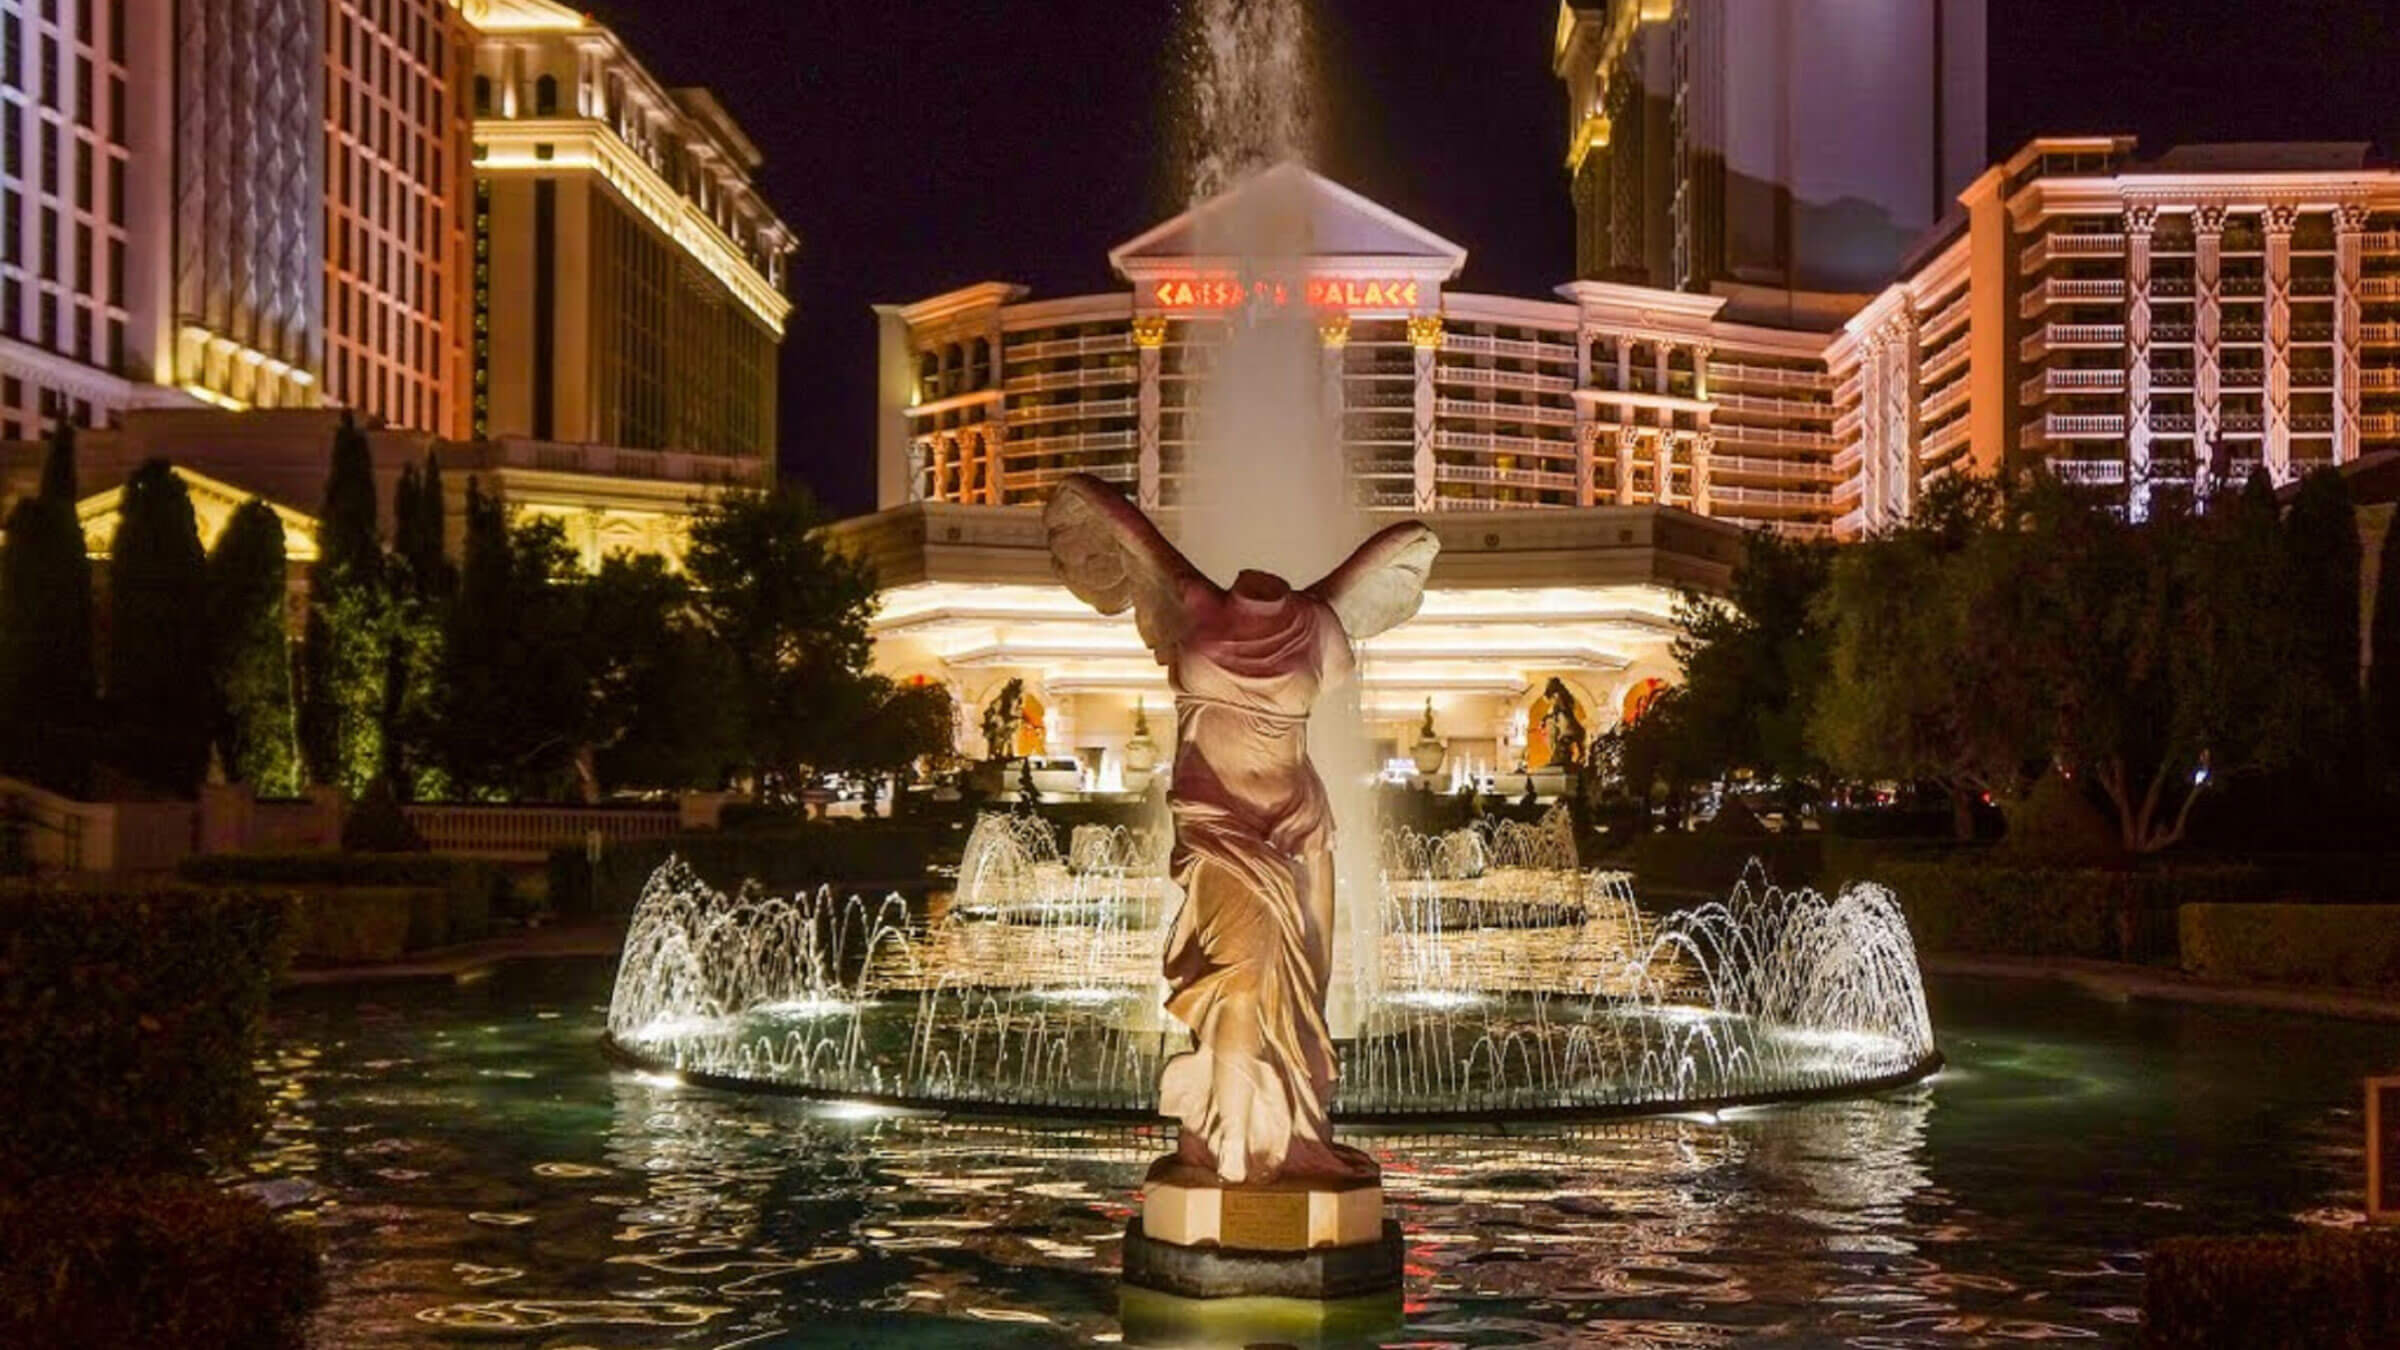 Headless statue in front of a fountain outside of Cesars Palace Las Vegas